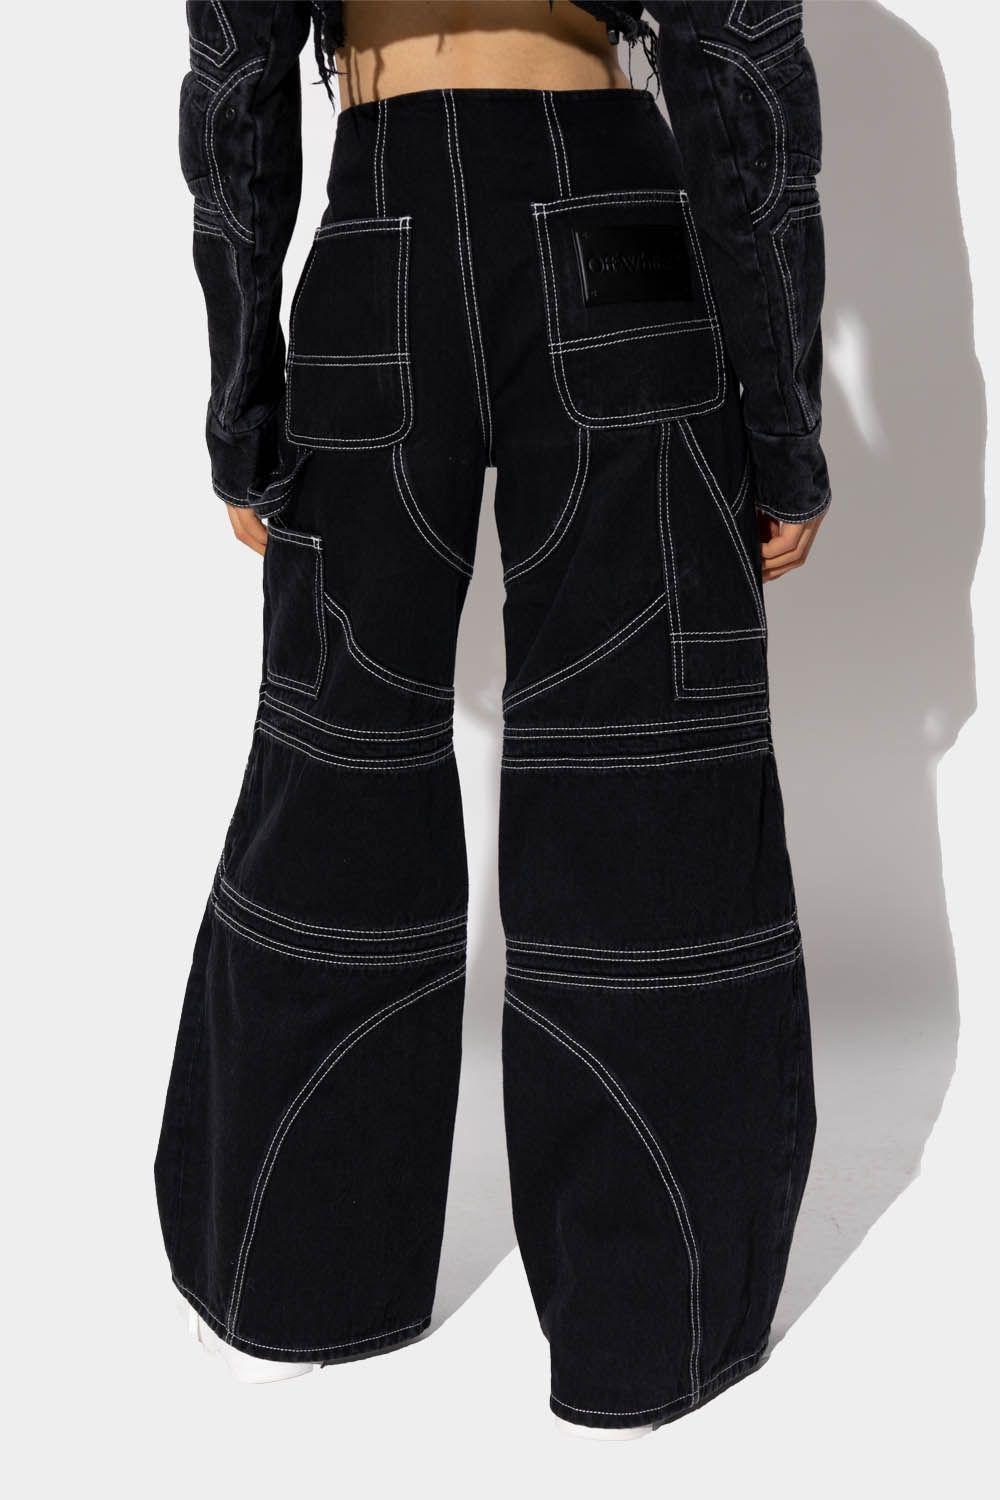 Off-White c/o Virgil Abloh Jeans With Stitching Details in Black | Lyst